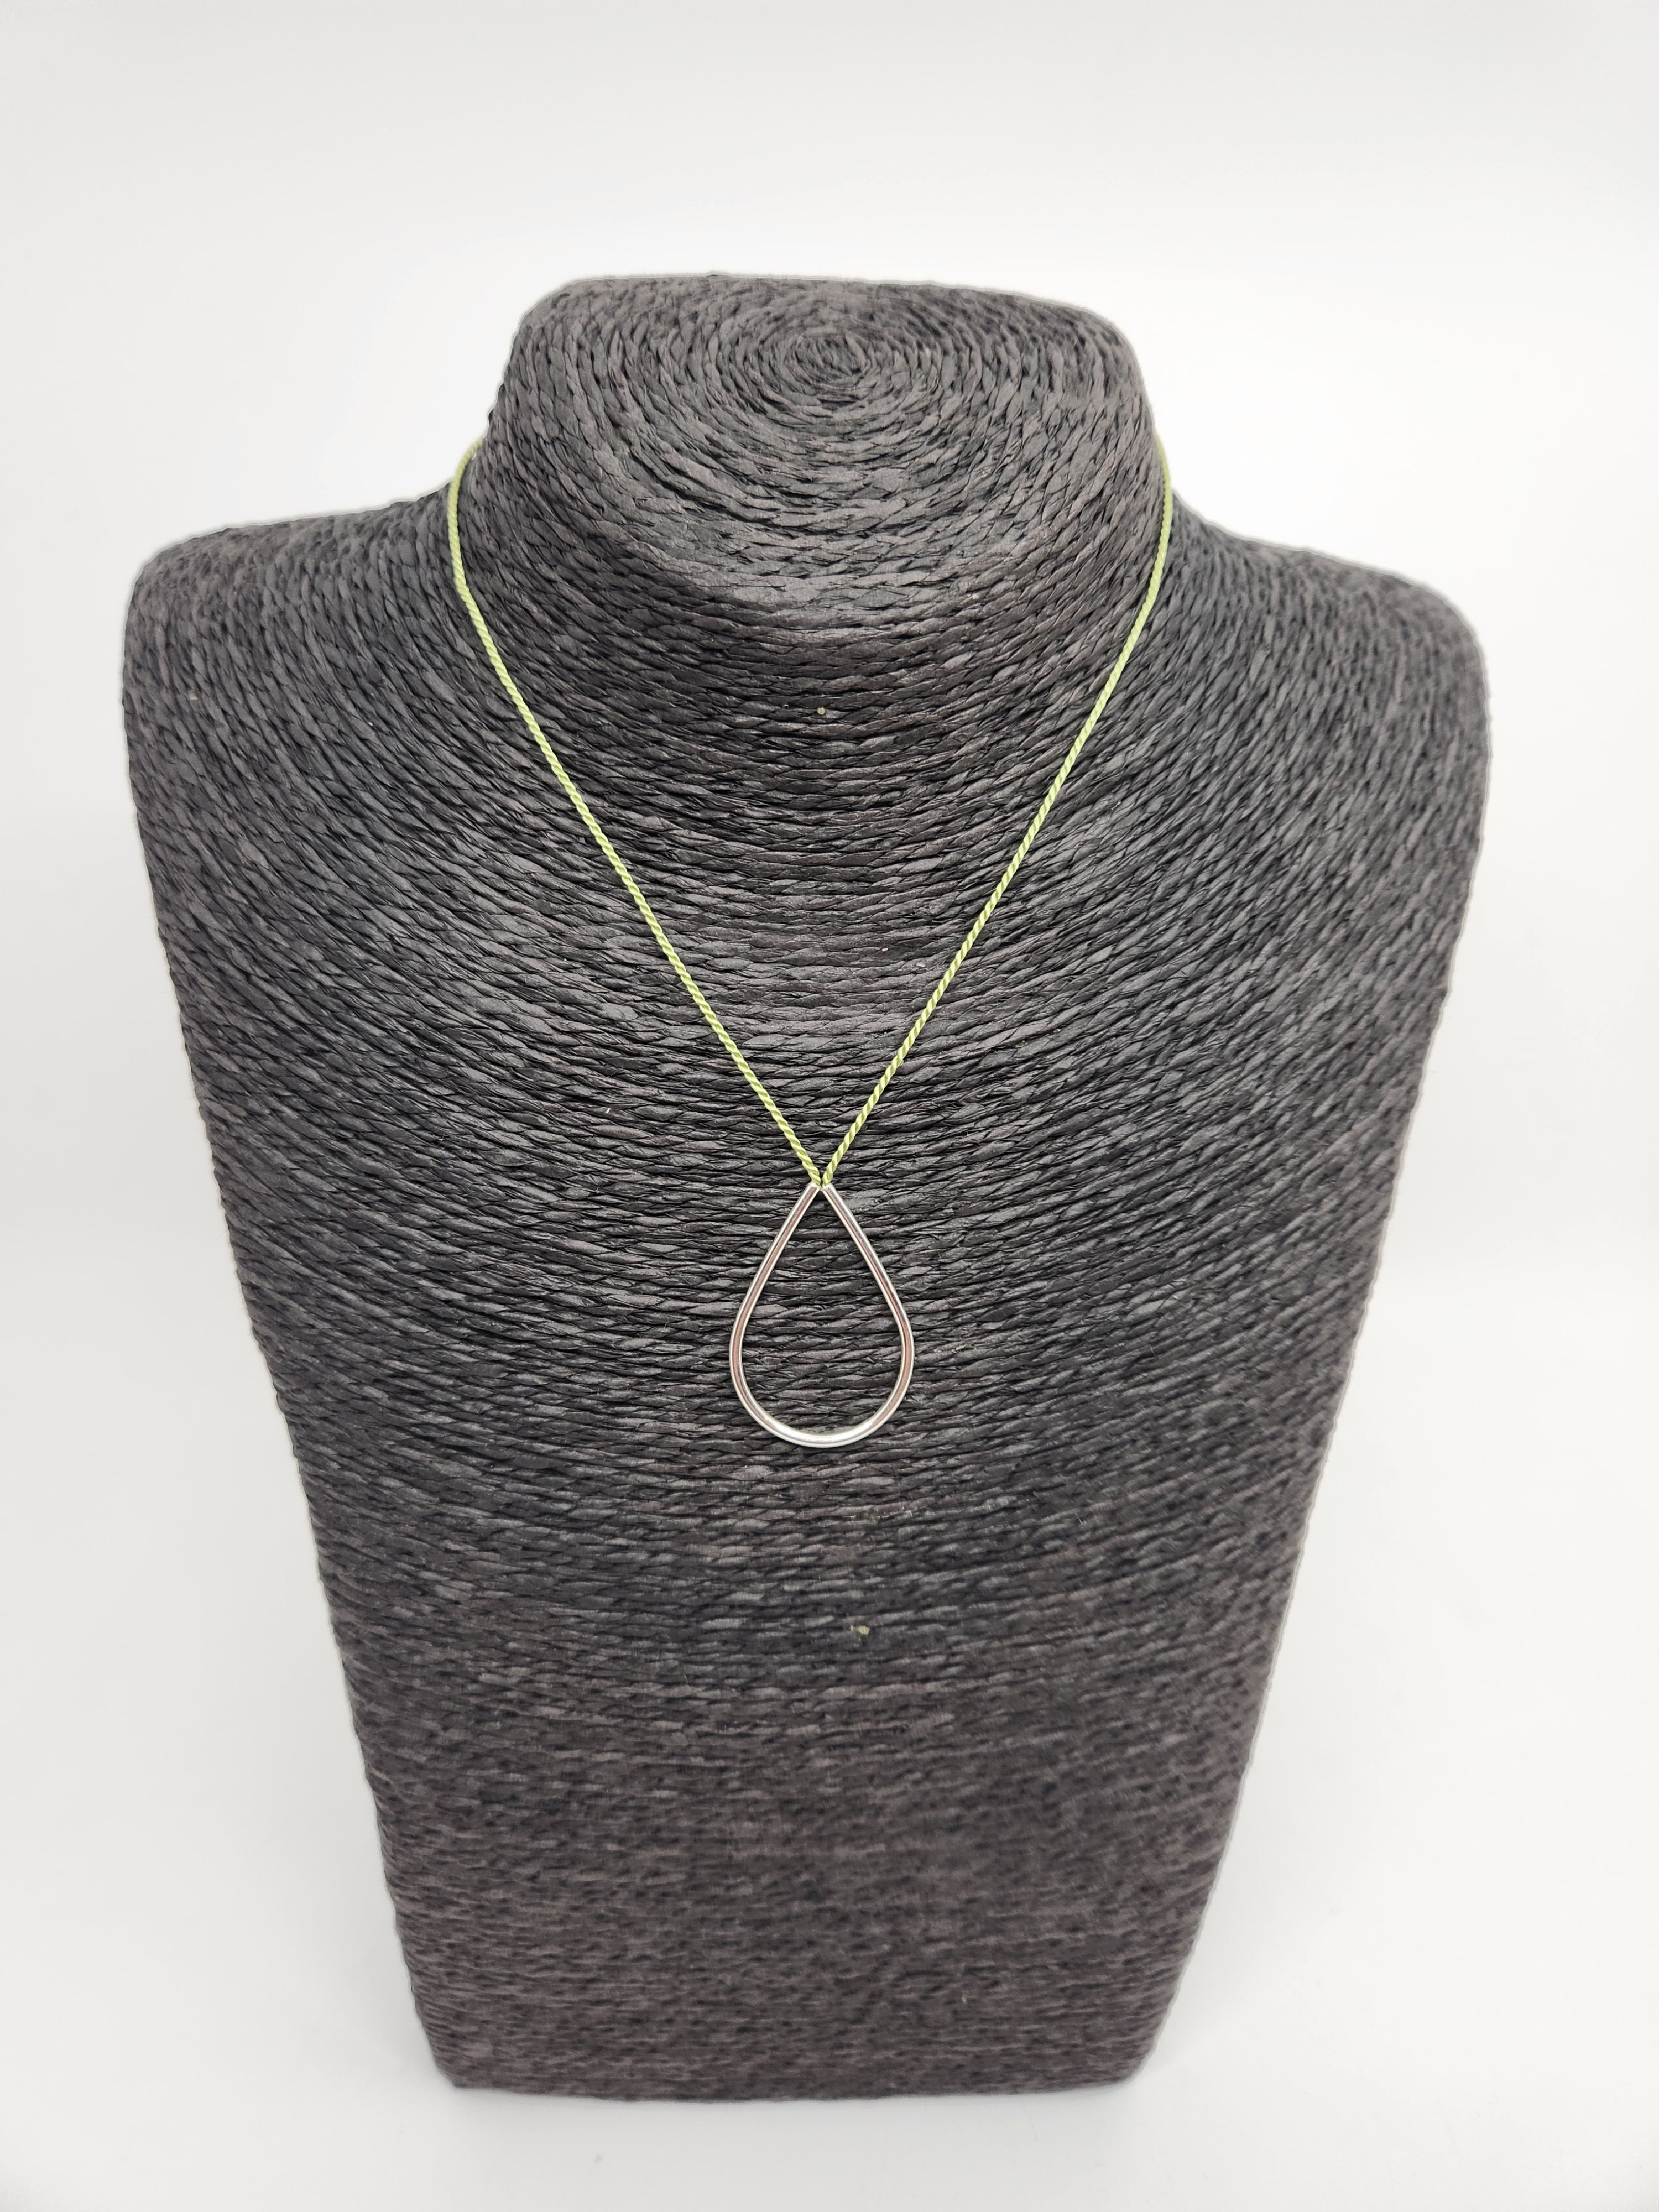 Small Dew Drop Necklace on Silk Cord - Assorted Cord Colours